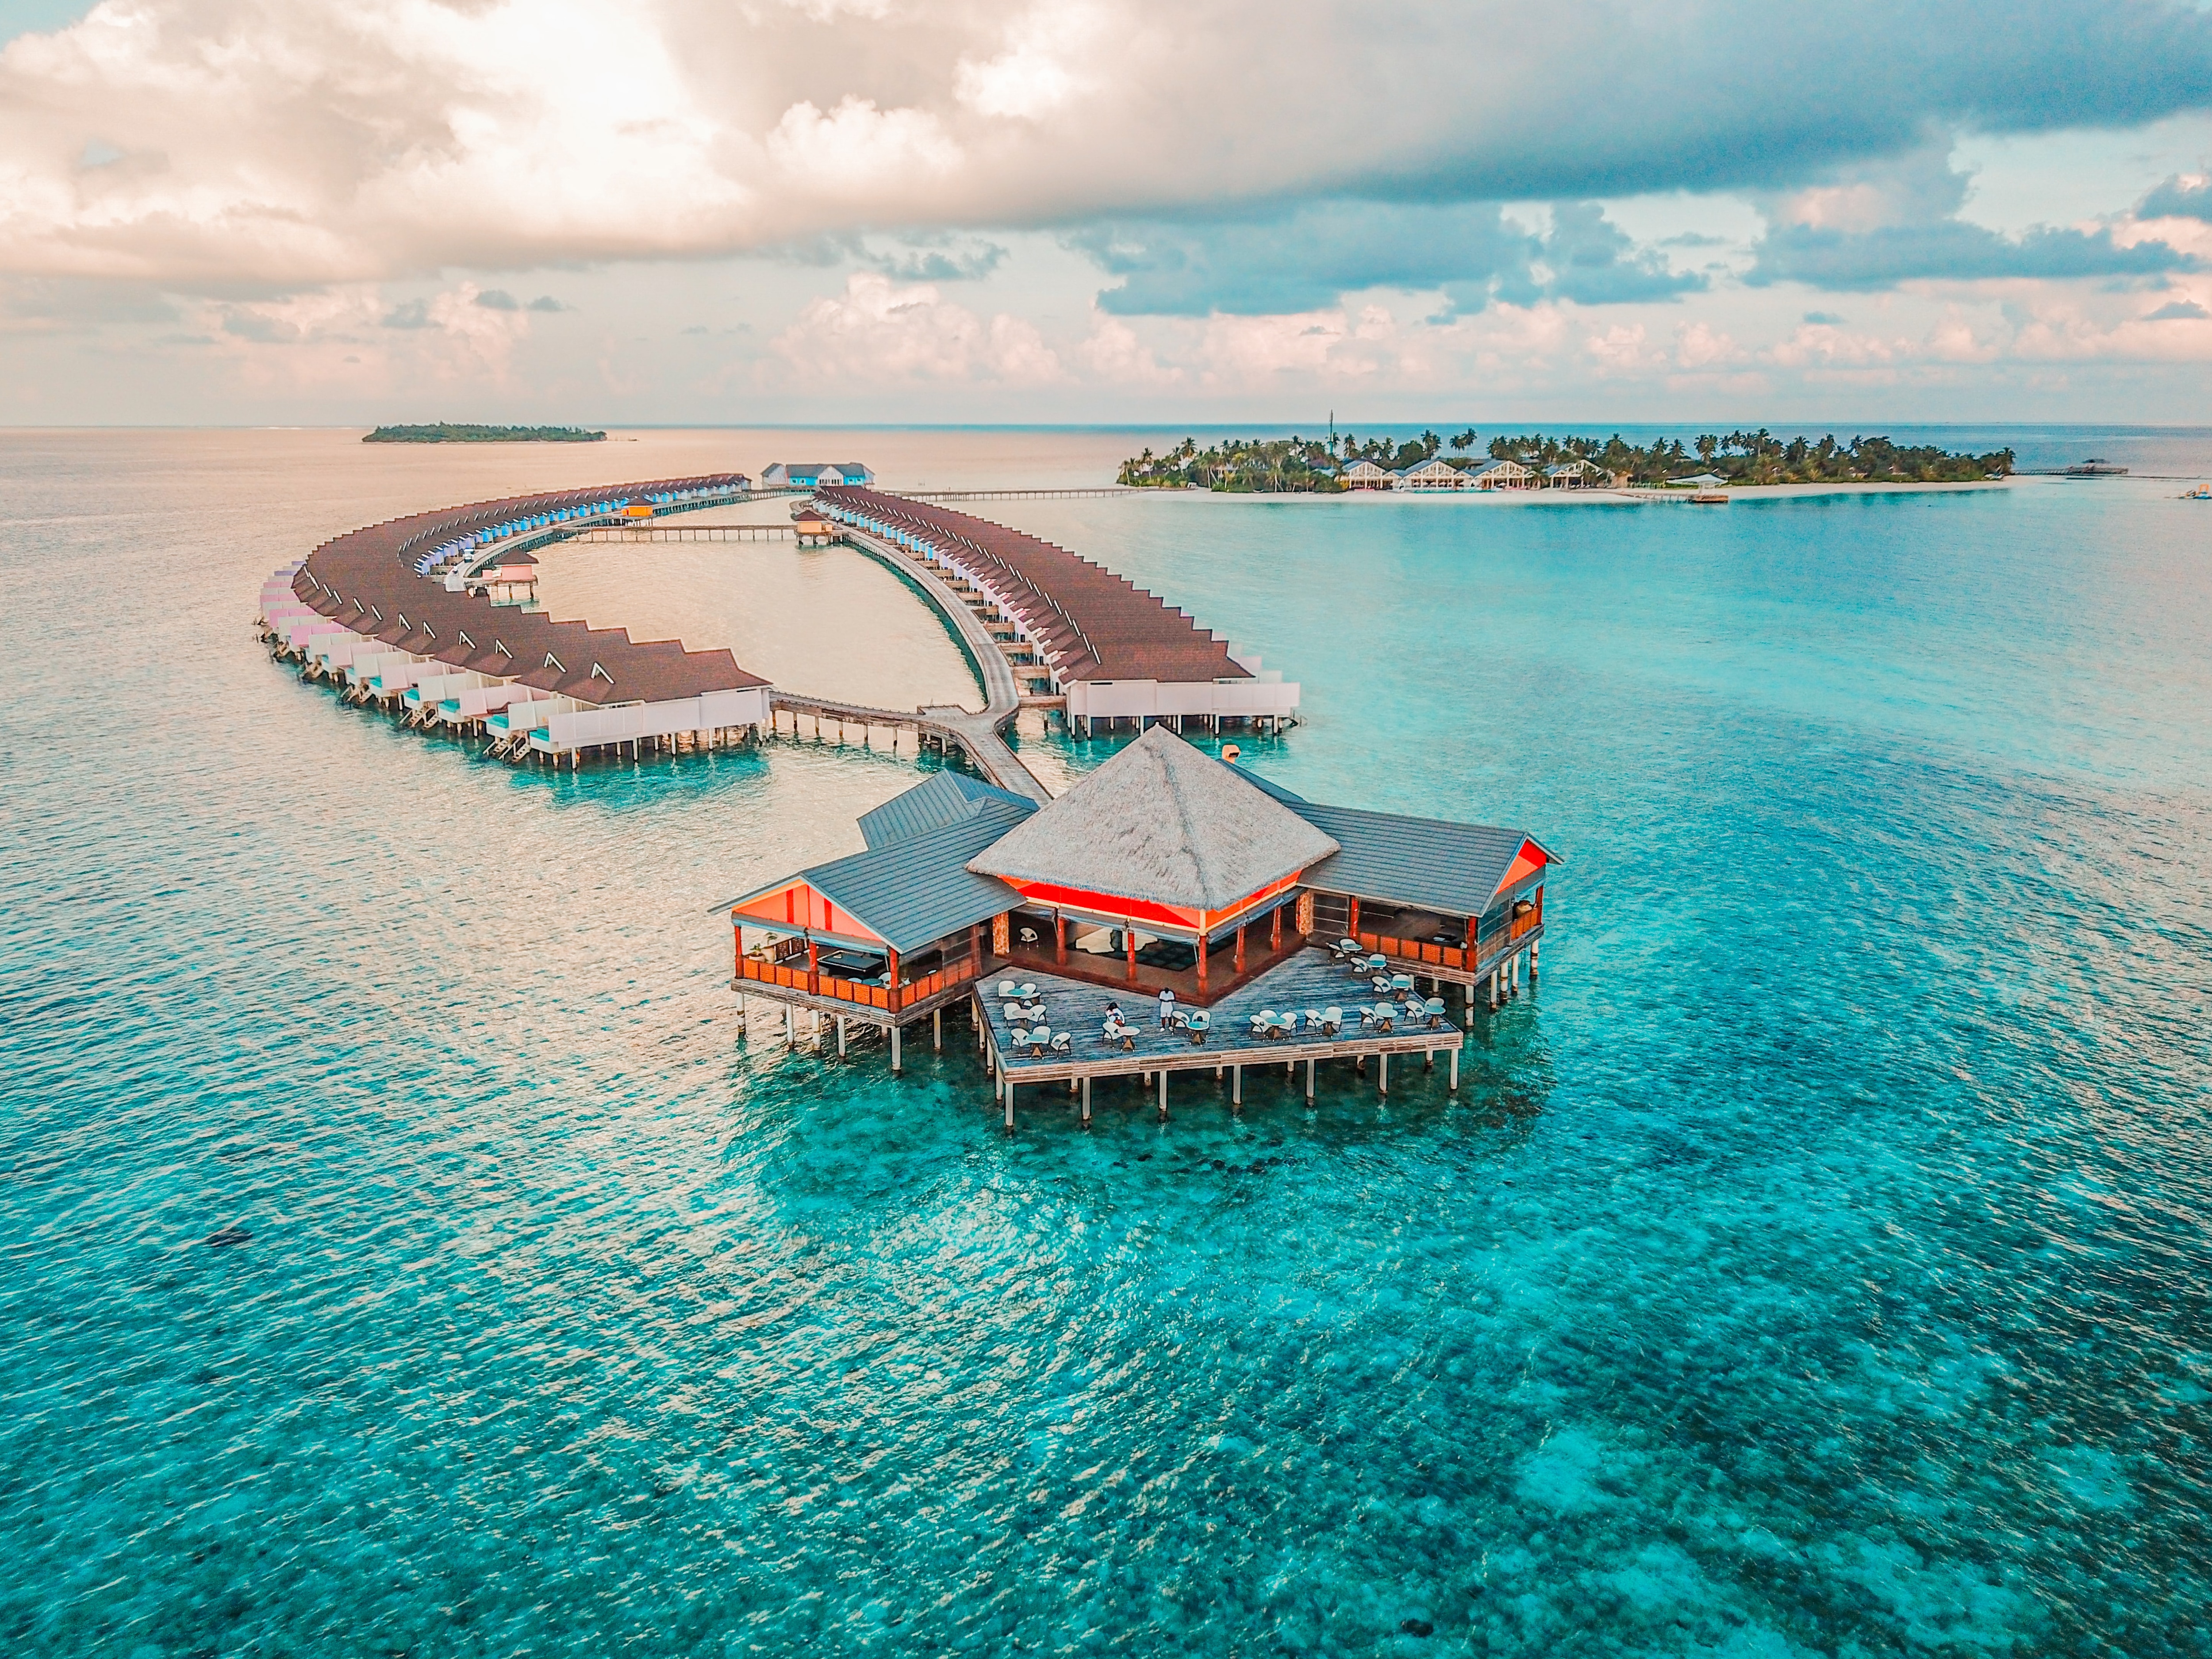 With a visa on arrival, one of the most amazing destinations to visit is the Maldives.(Unsplash)